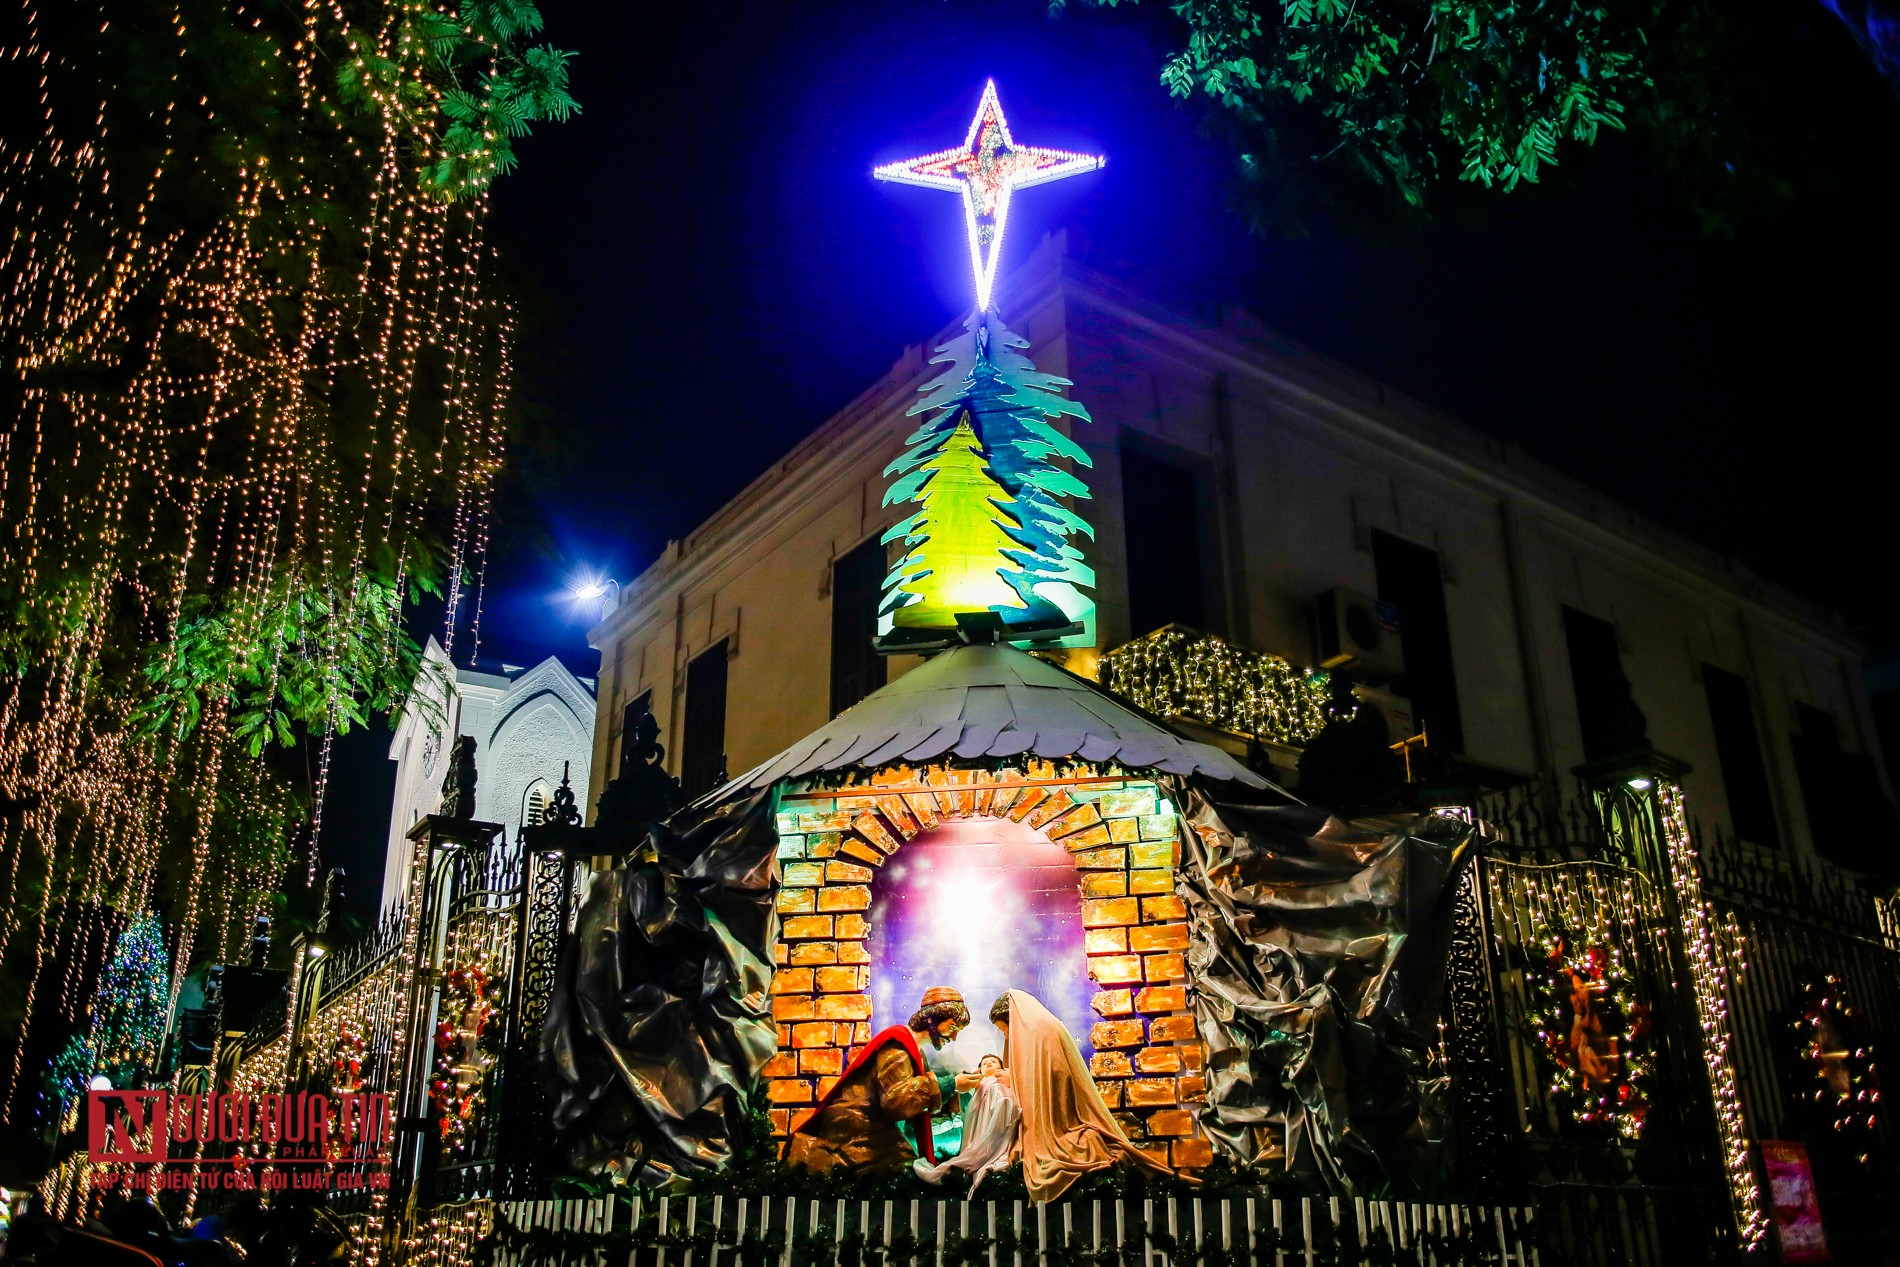 In photos: Churches in Hanoi splendidly decorated for Christmas